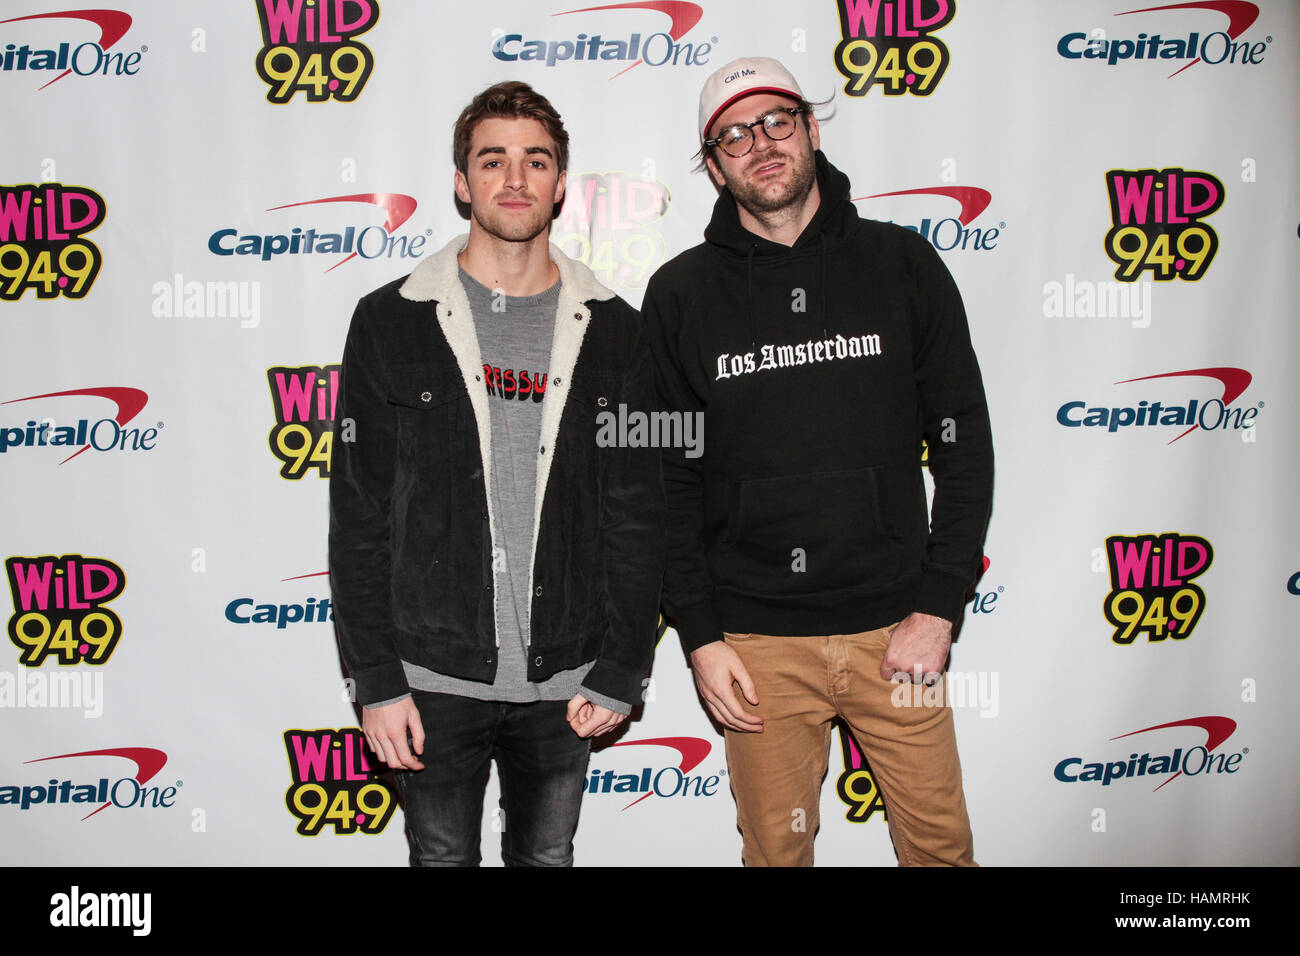 San Jose, USA. 01st Dec, 2016. Recording artist (L-R) Andrew Taggart and Alex Pall of the music duo The Chainsmokers attend WiLD 94.9's FM's Jingle Ball 2016 presented by Capital One at SAP Center on December 1, 2016 in San Jose, California. Credit:  The Stock Photo